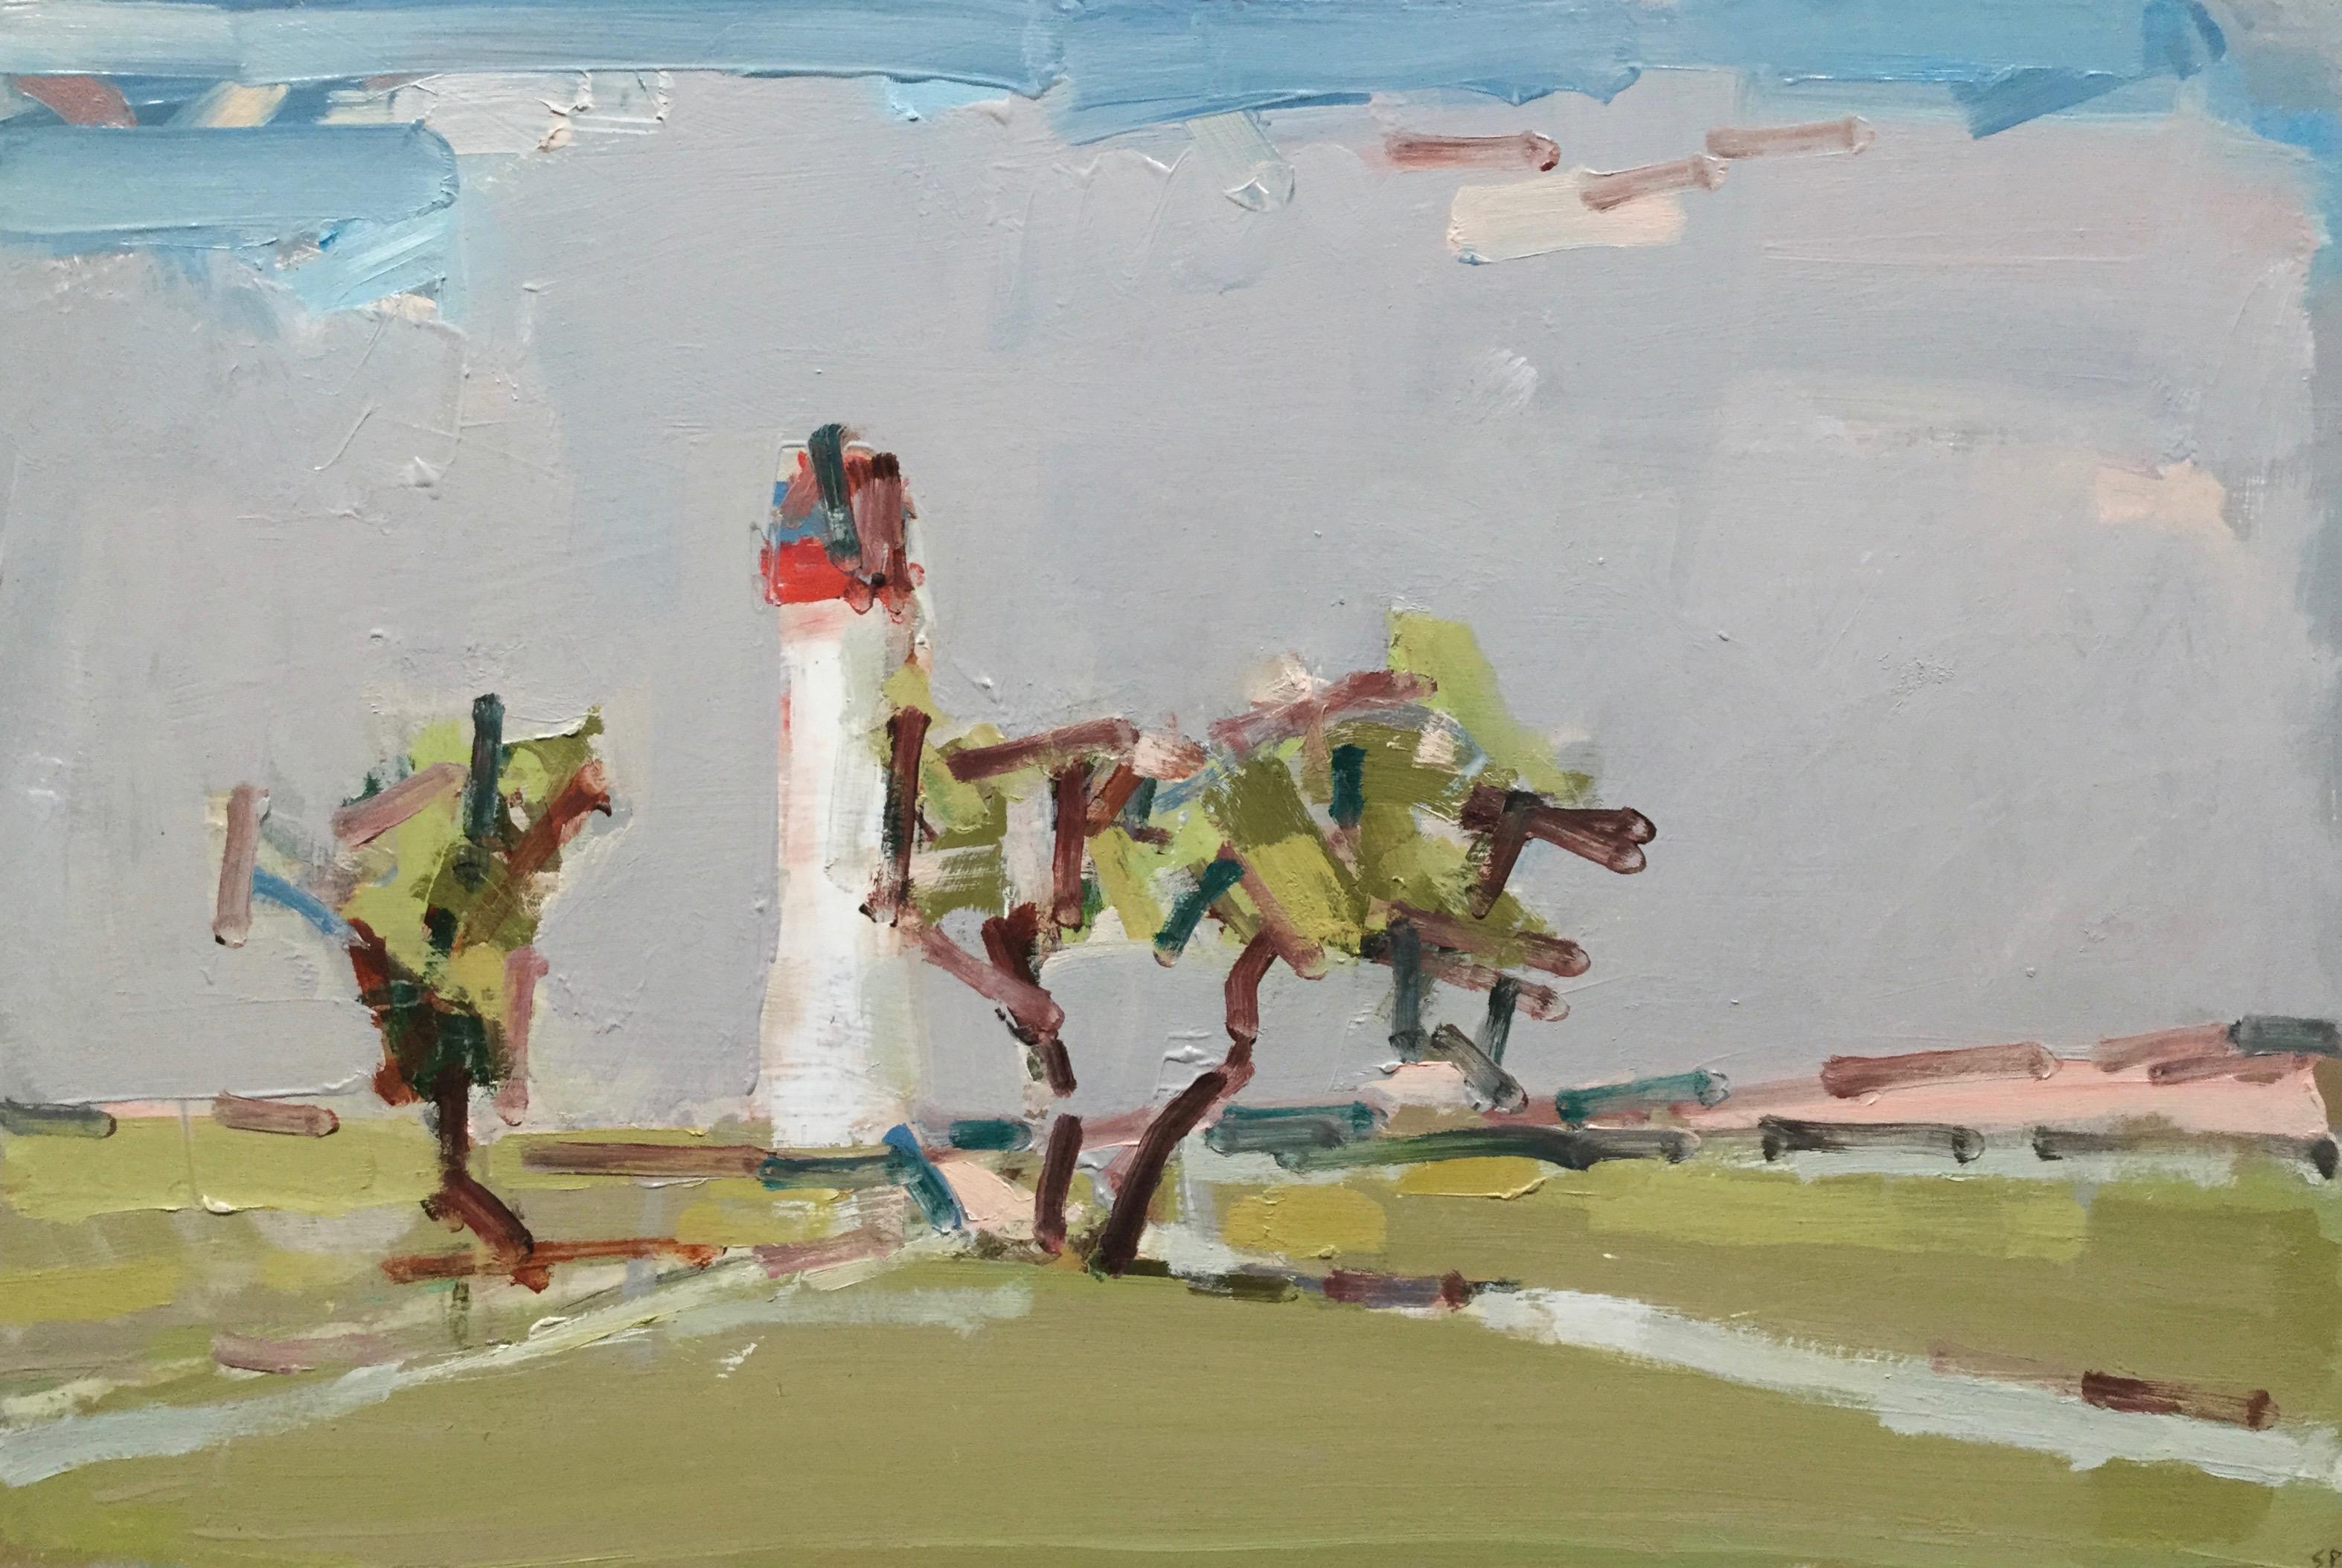 Lighthouse II, St-Martin-de-Ré - French coastal scene, green and grey - Painting by Stephen Palmer